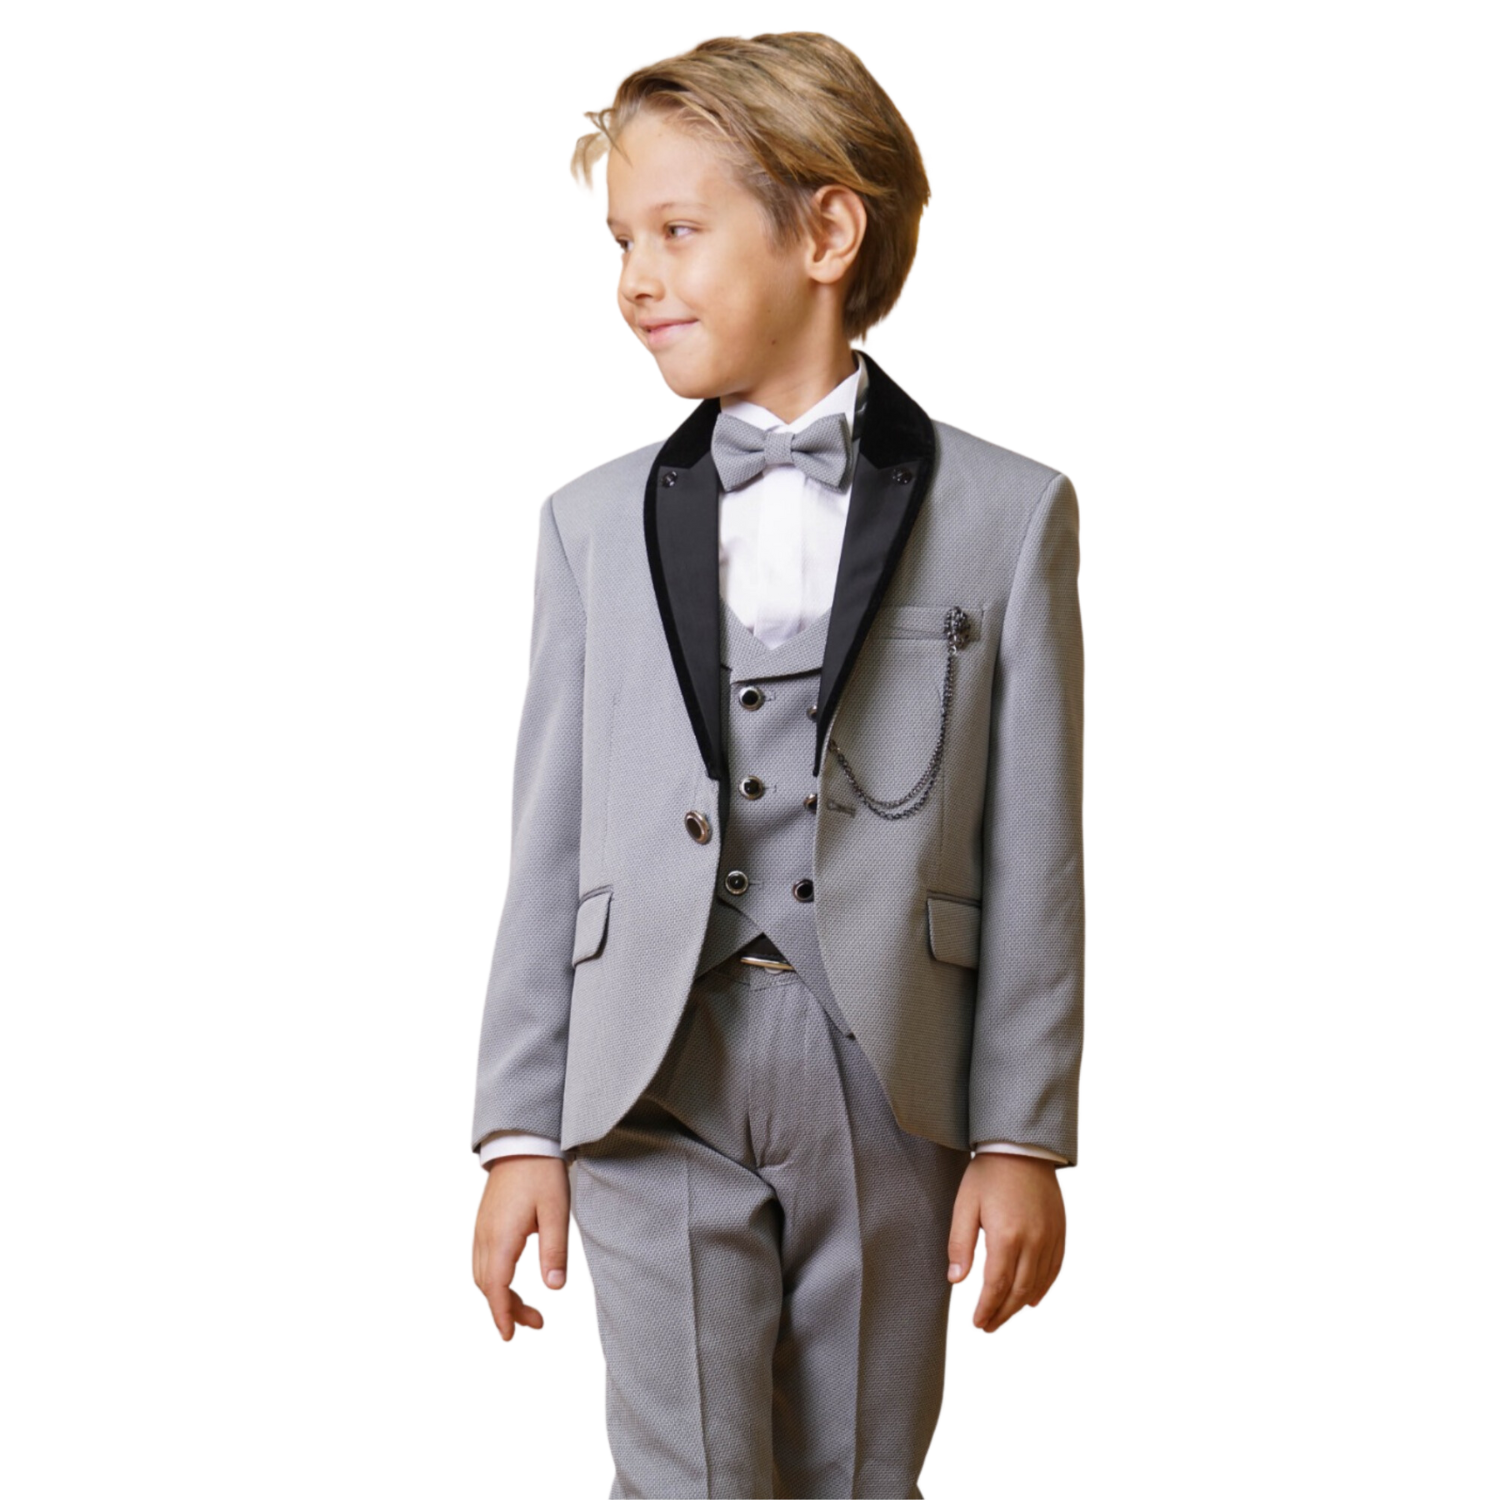 Majestic Max Formal Boys Suit